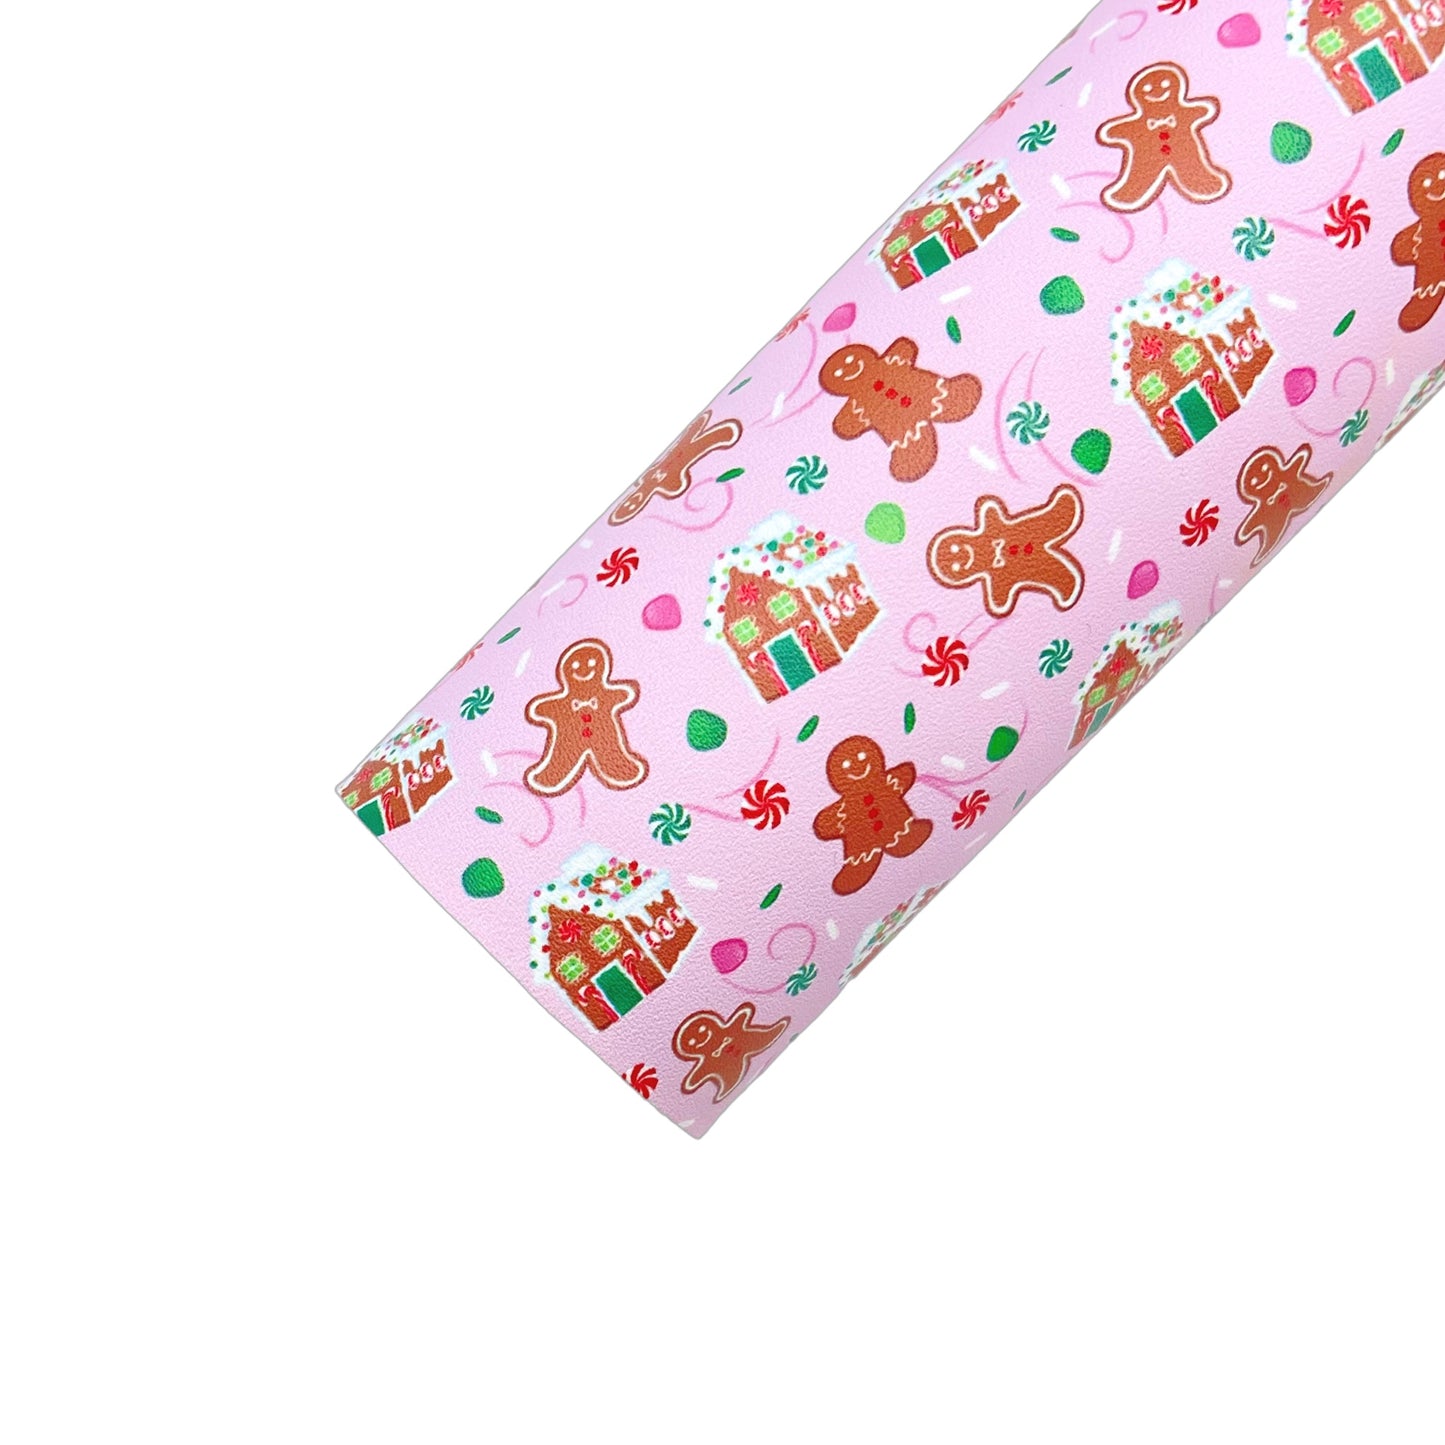 Rolled pink faux leather sheet with gingerbread house, gingerbread man, and gumdrop Christmas pattern.